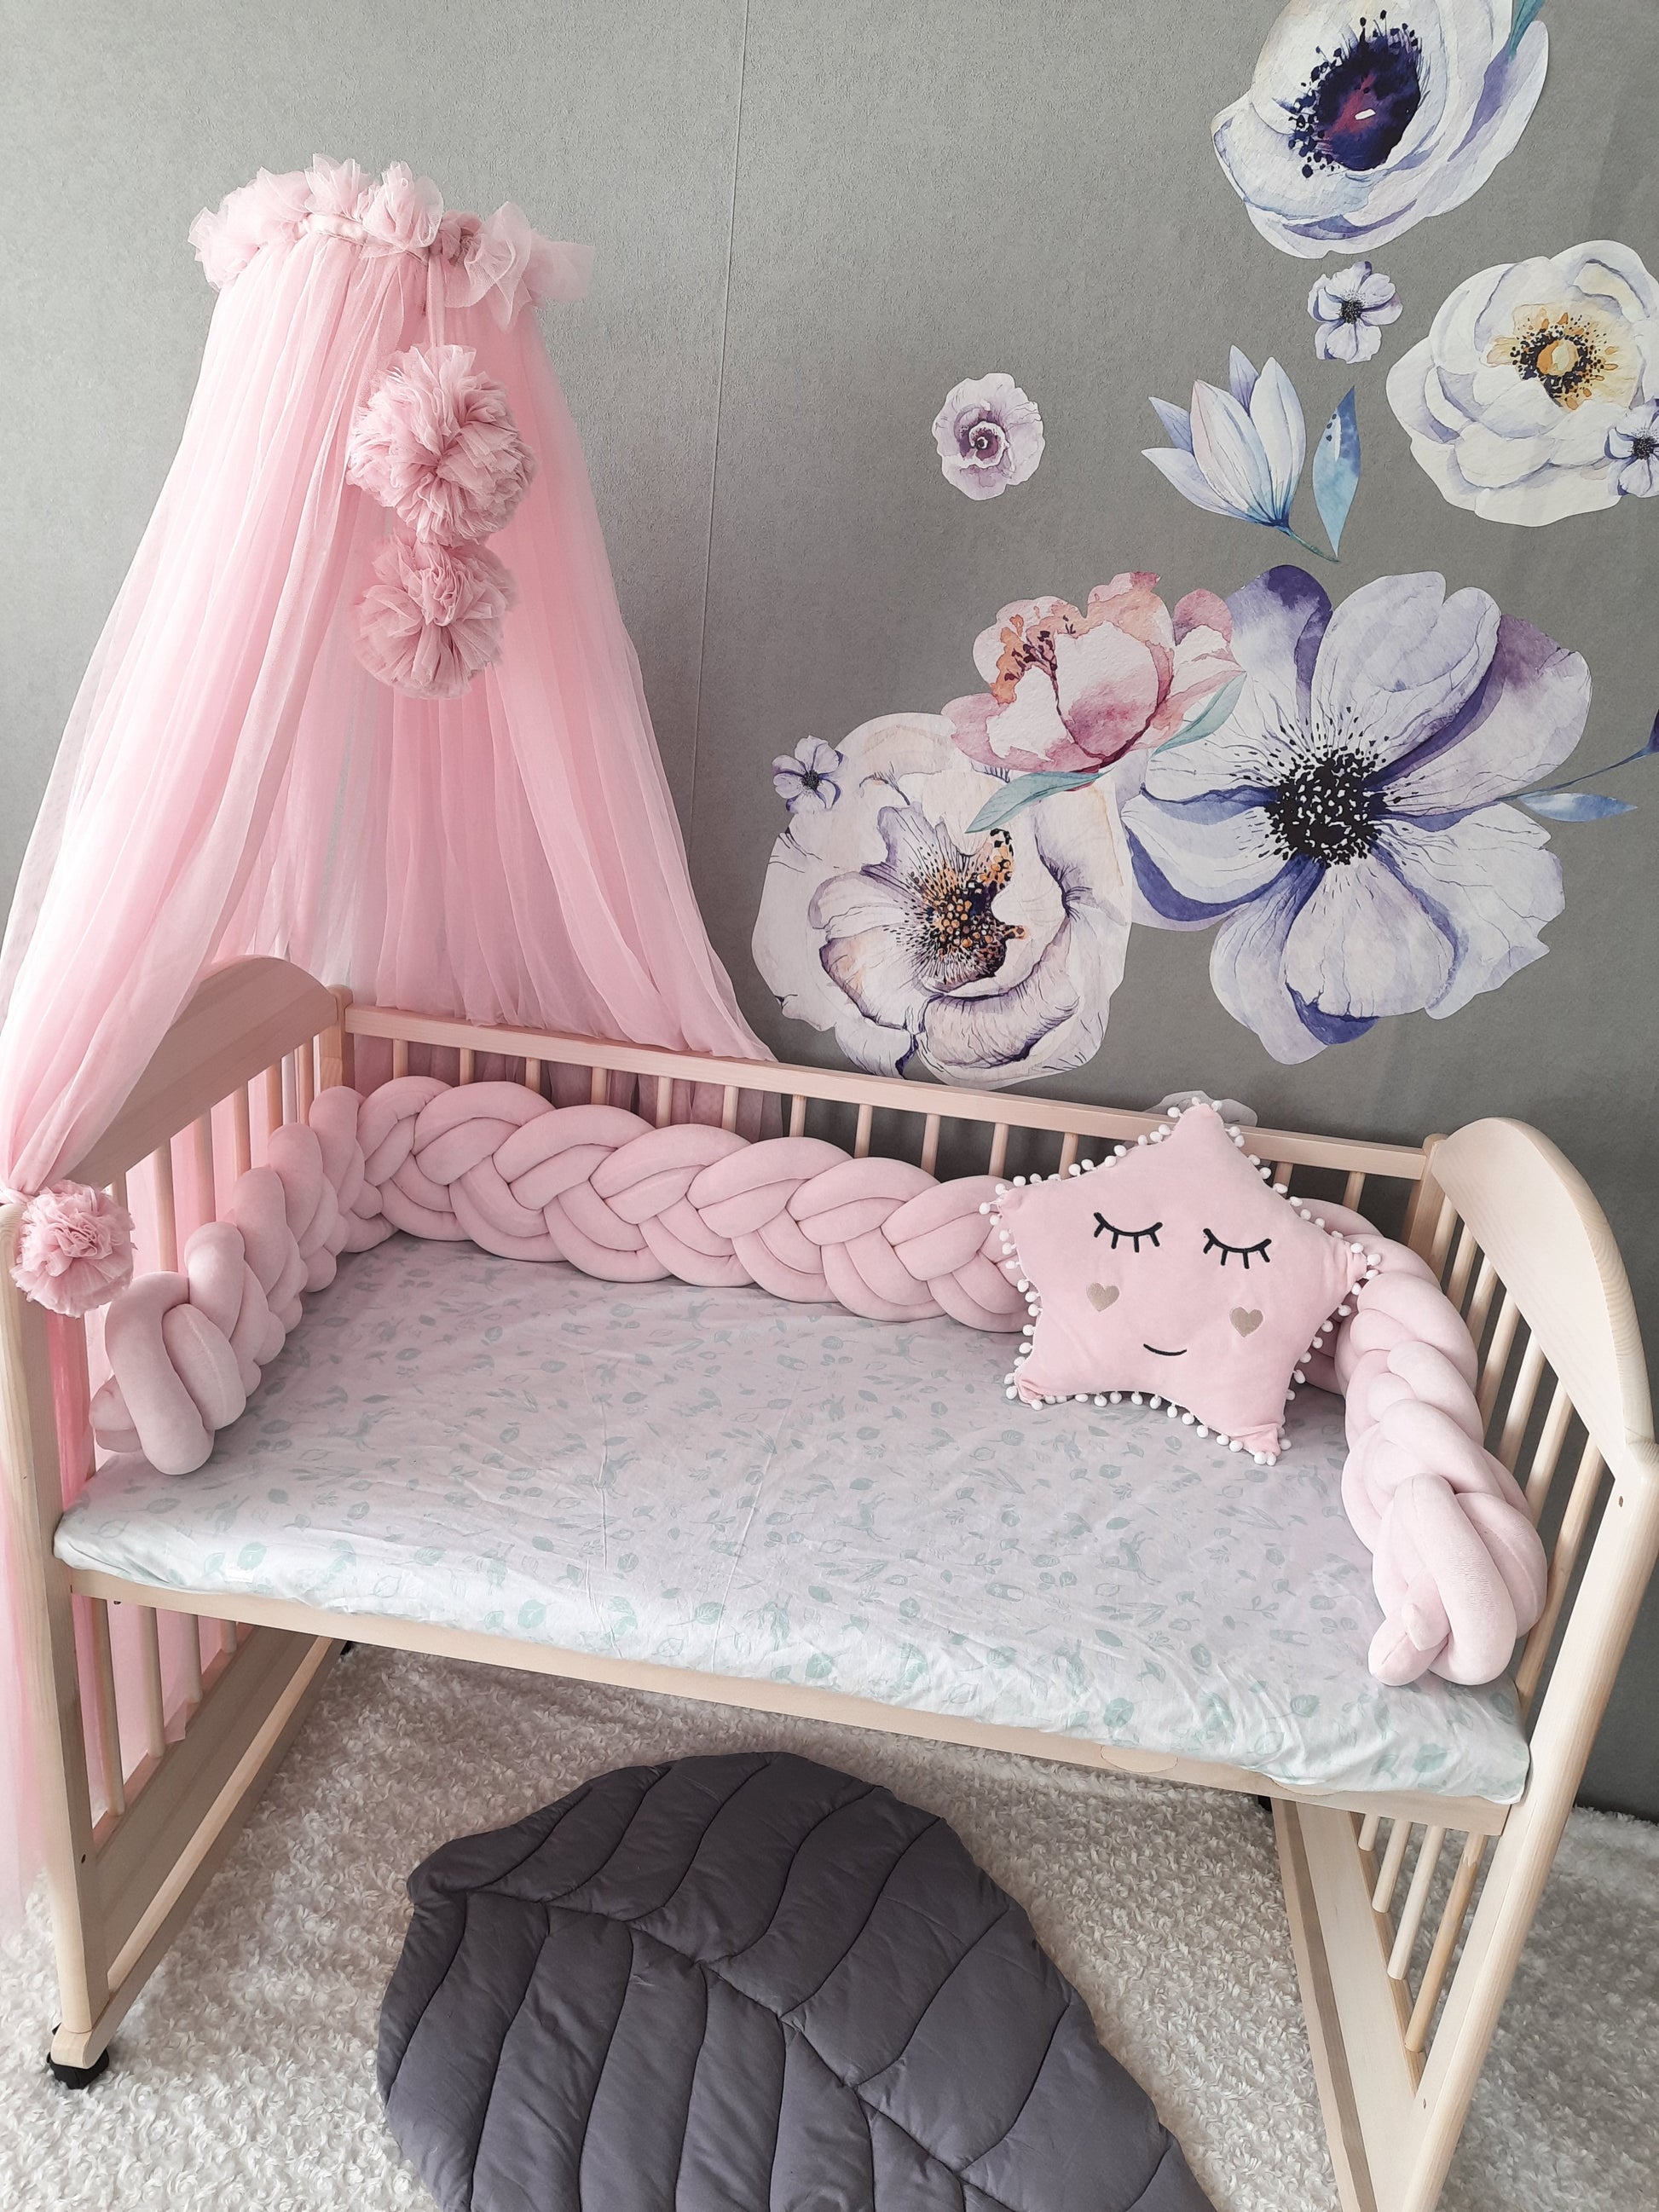 Double braided crib bumper and star pillow on the crib with canopy. Leaf mat on the floor. Light pink color.